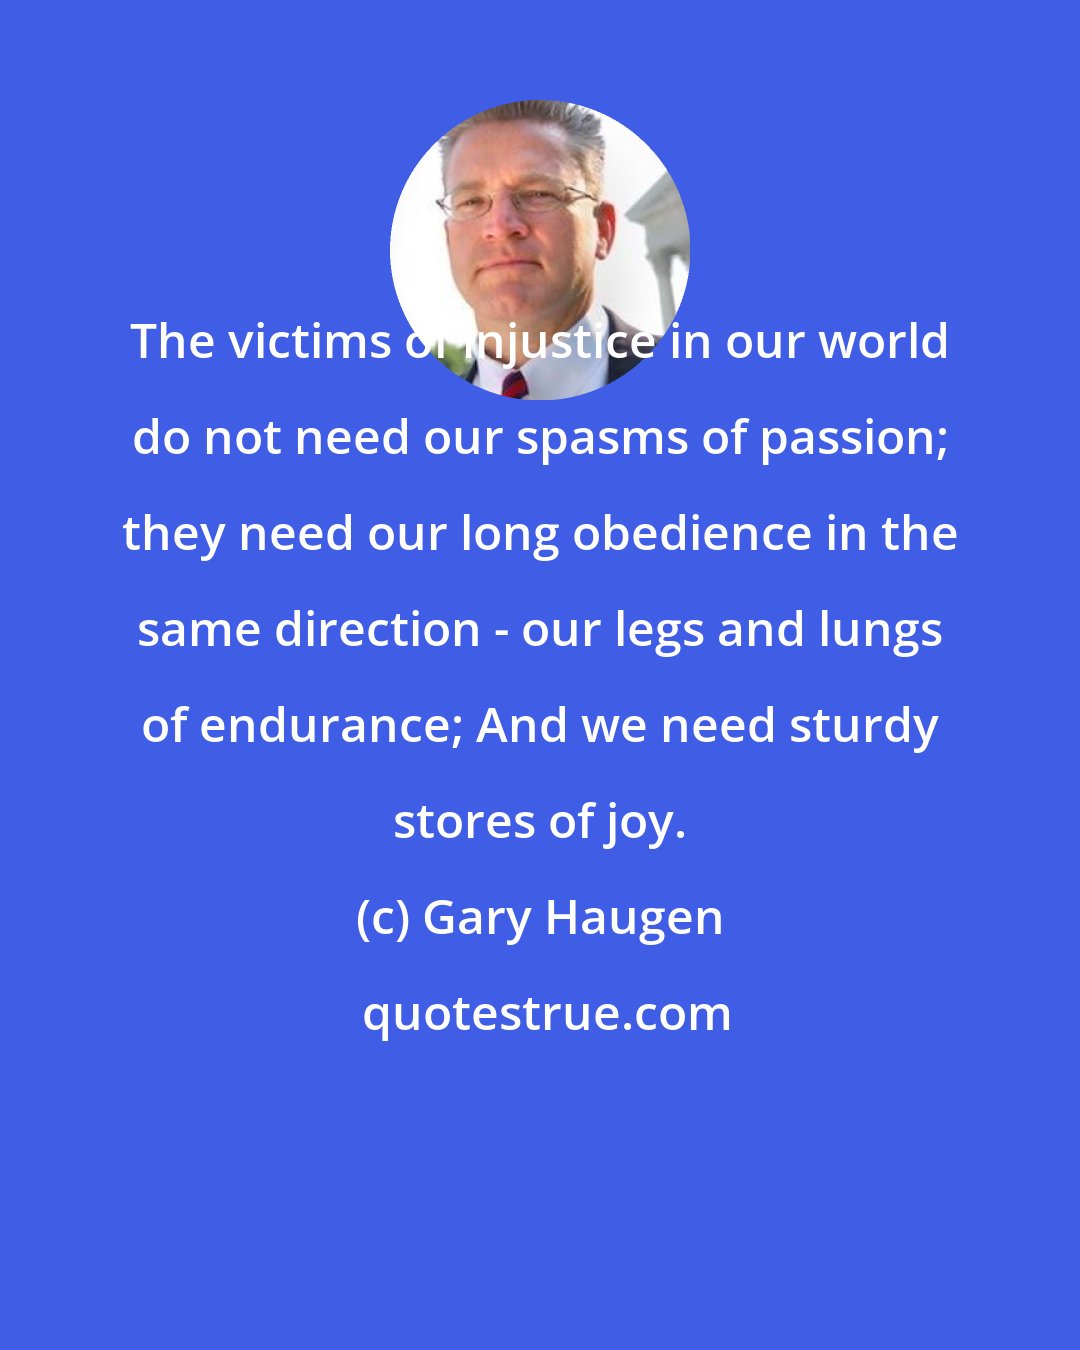 Gary Haugen: The victims of injustice in our world do not need our spasms of passion; they need our long obedience in the same direction - our legs and lungs of endurance; And we need sturdy stores of joy.